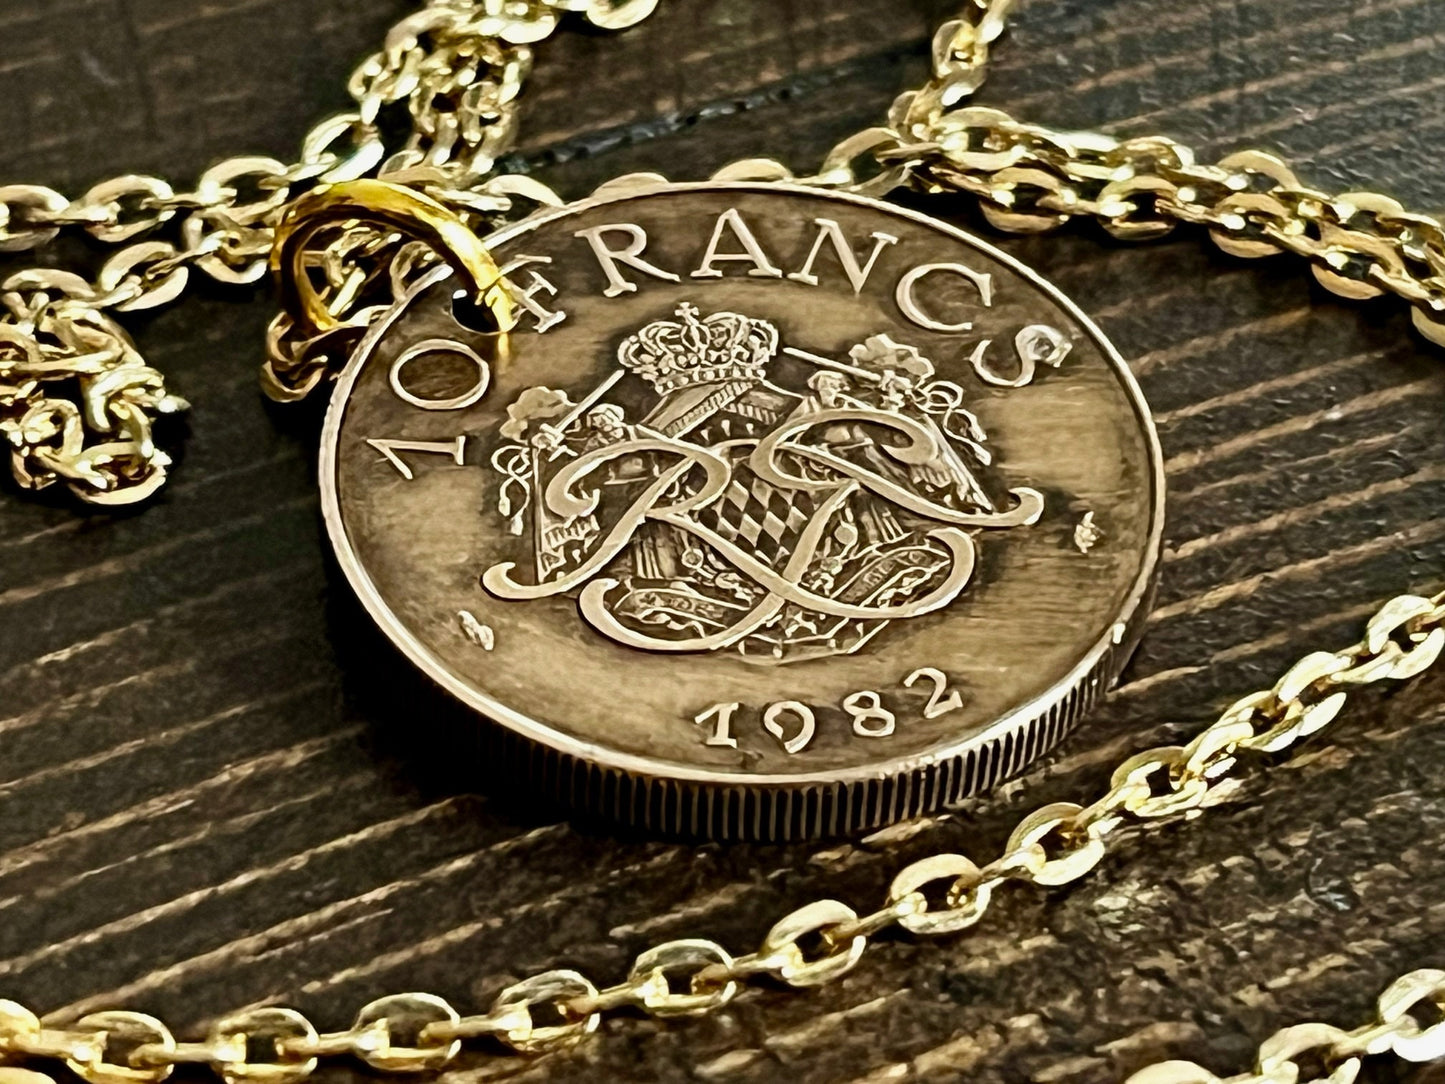 France 10 Francs Coin Pendant Personal Necklace Old Vintage Handmade Jewelry Gift Friend Charm For Him Her World Coin Collector